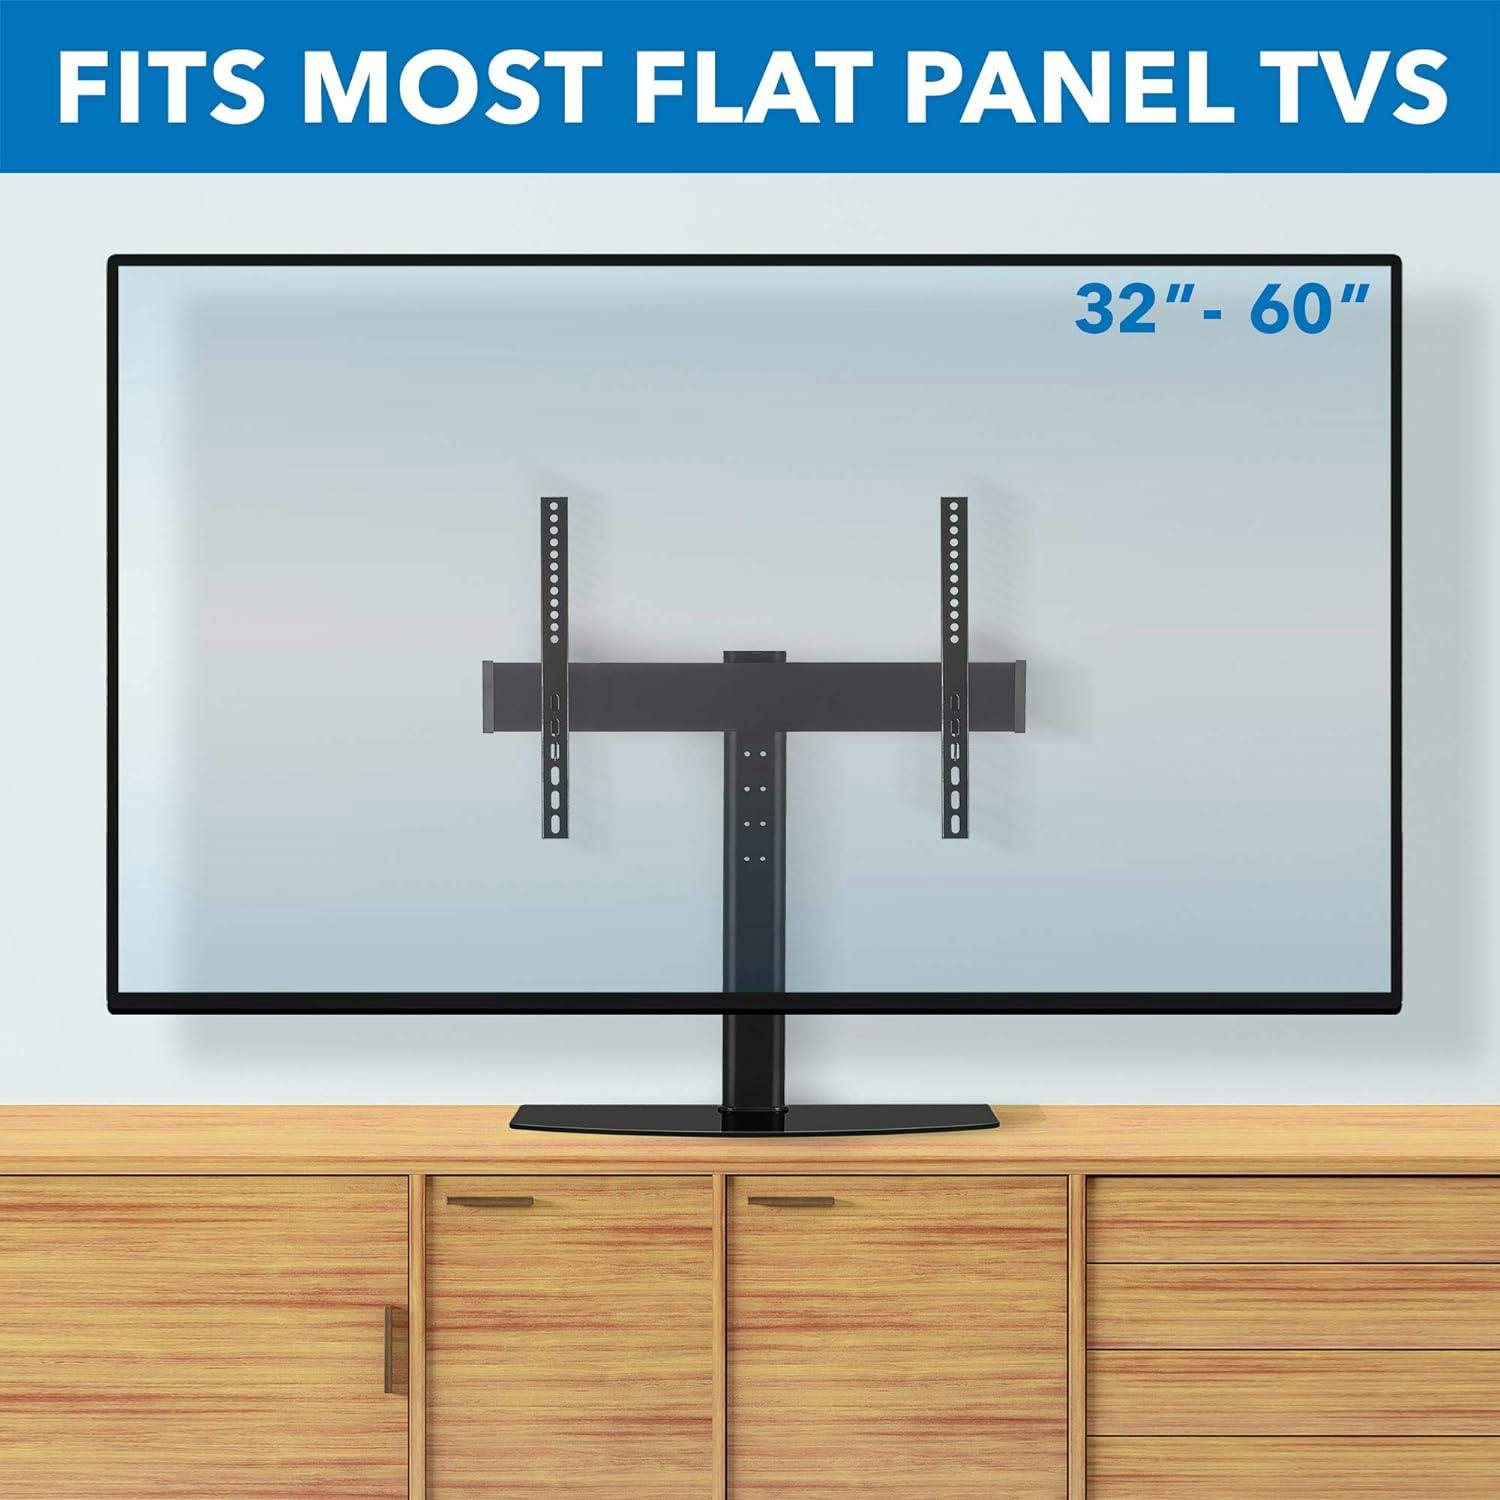 Elevate Black Silk Screen Universal TV Stand with Tempered Glass Shelves